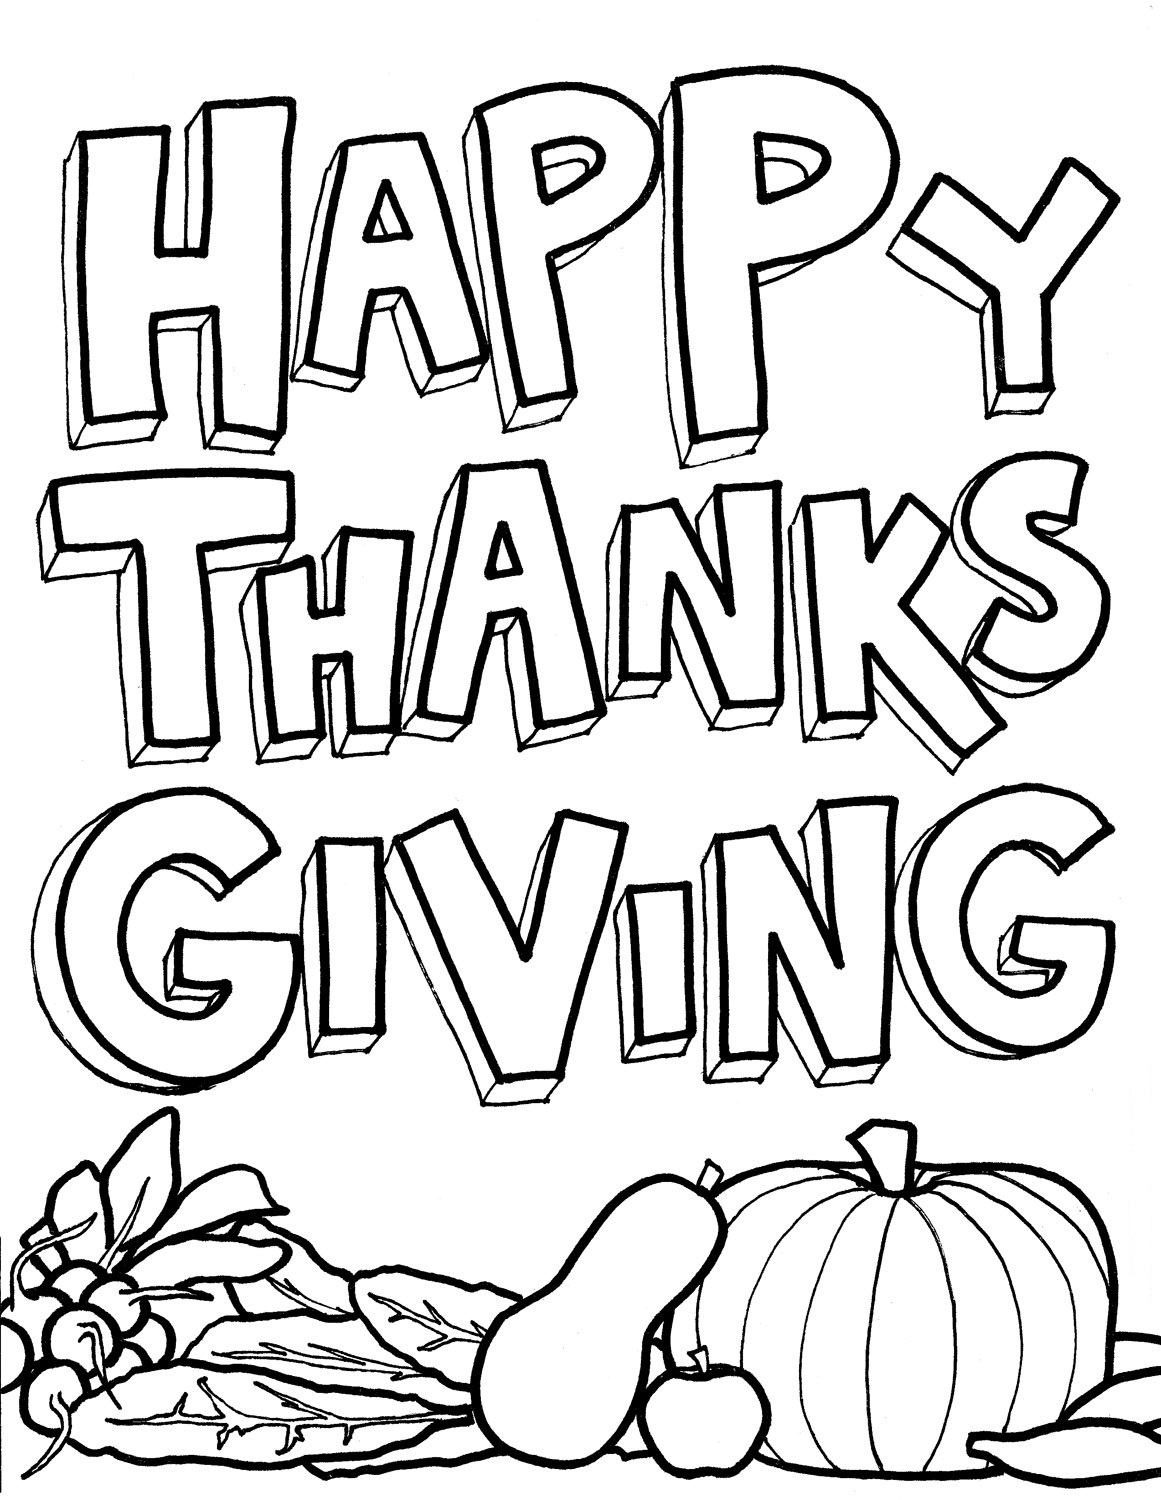 free coloring pages for thanksgiving - Free, Printable Turkey Coloring Pages for the Kids Freebies